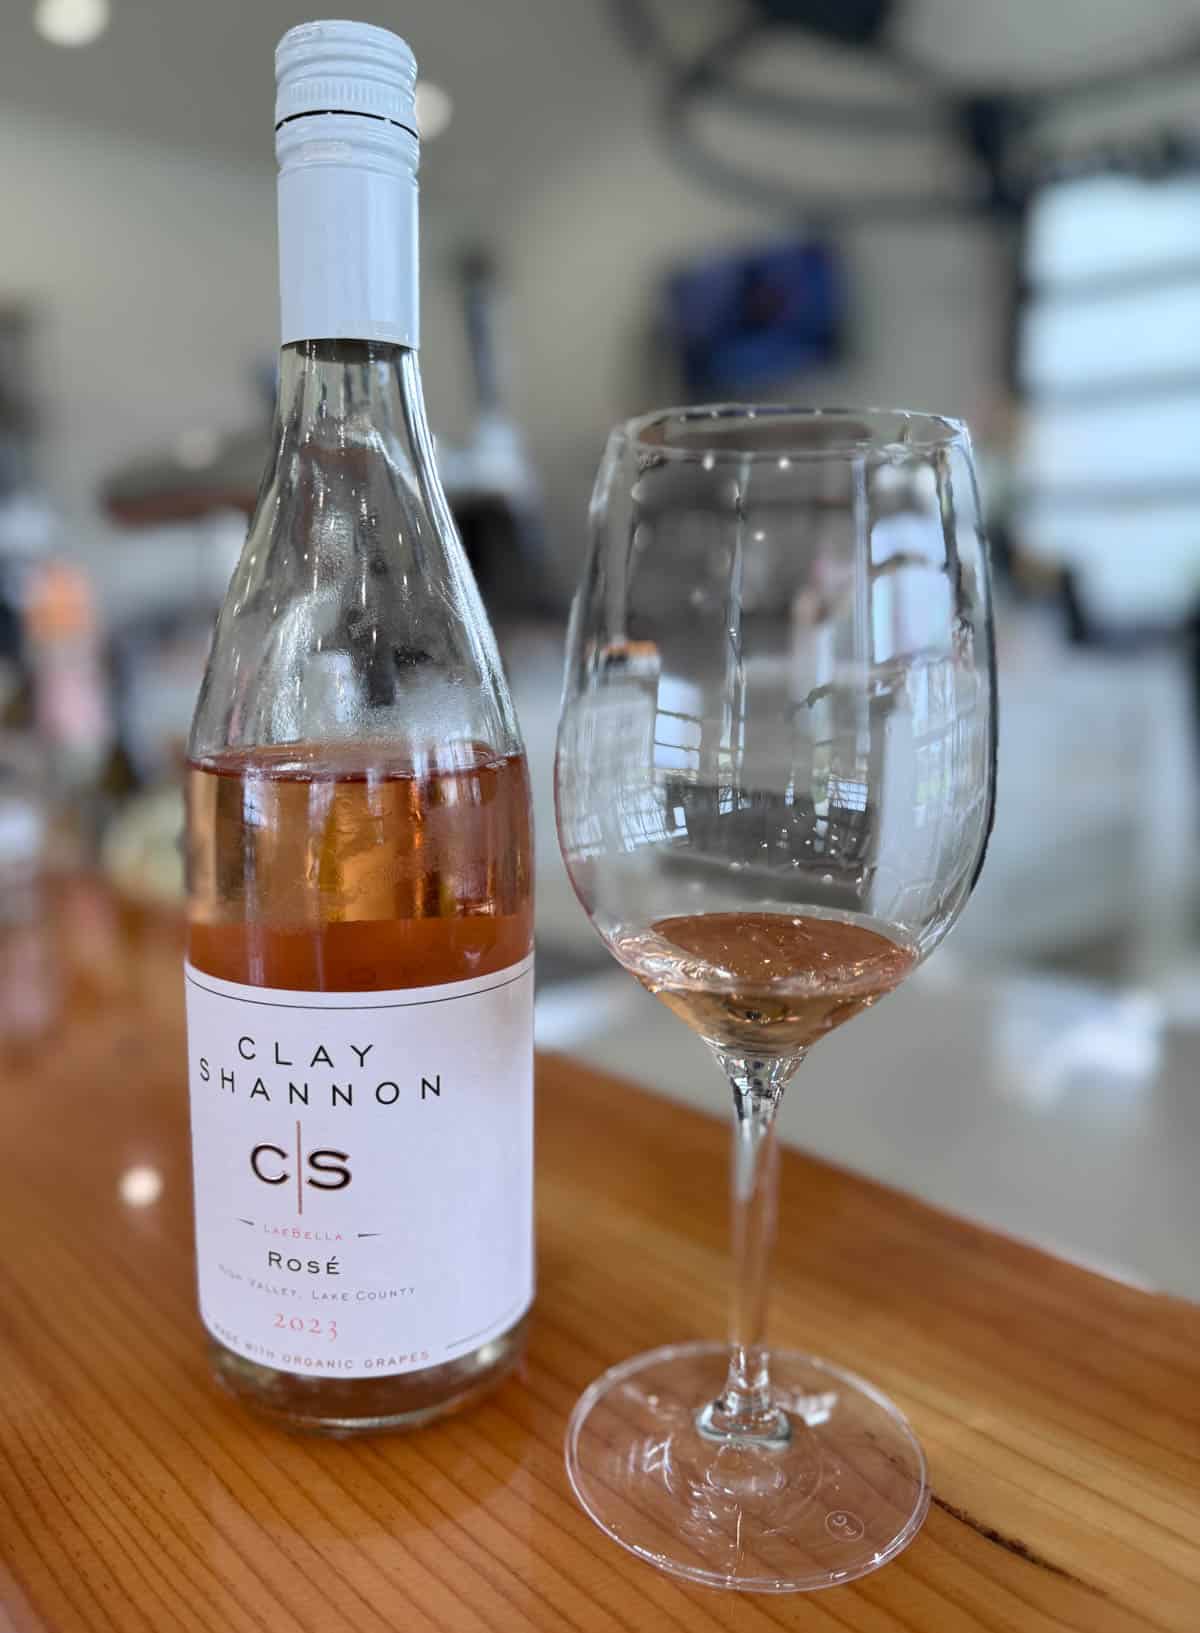 Bottle of rosé wine with glass with small tasting.